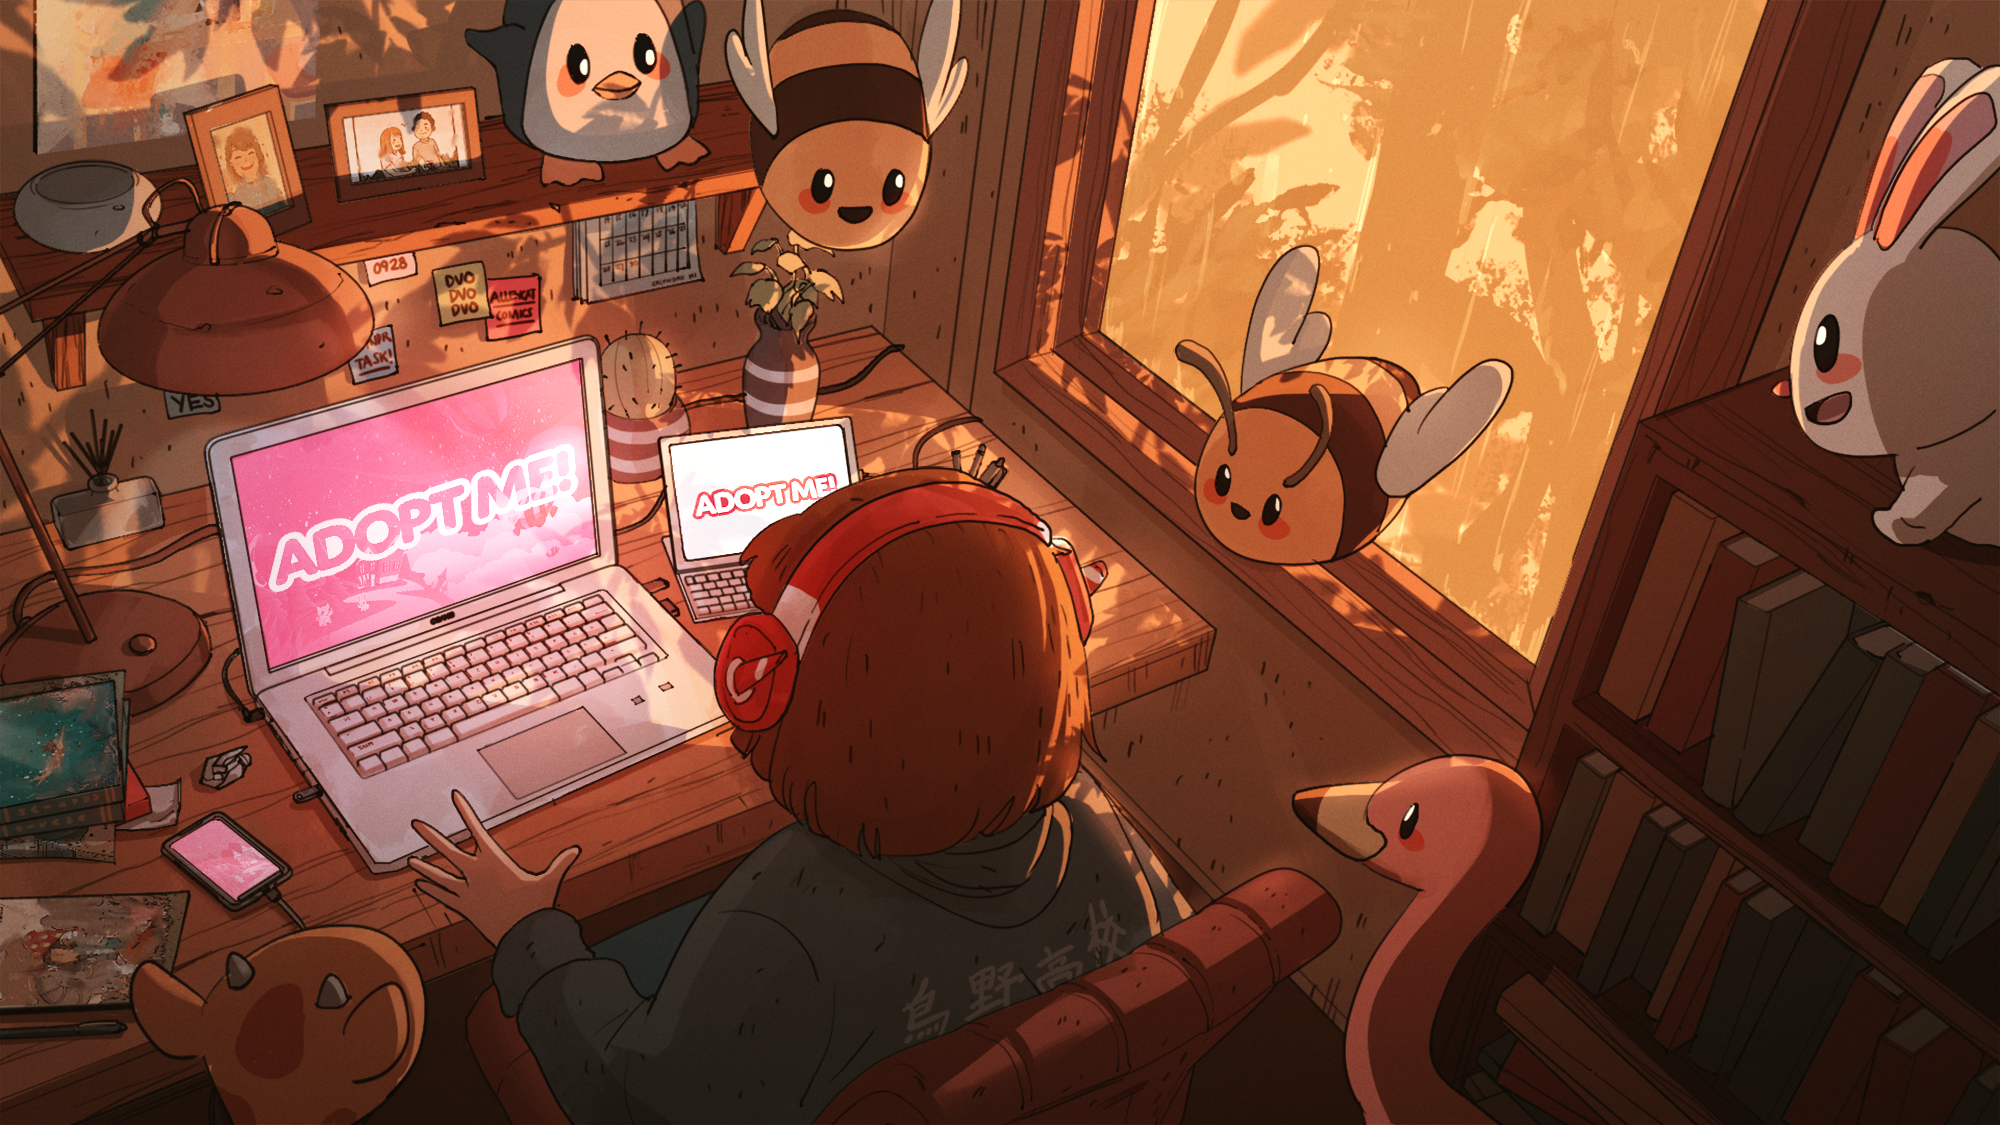 A stylized illustration of someone working from a home office. They are surrounded by various Adopt Me pets, including bees, rabbits, penguins, and flamingos. In front of them is a busy wooden desk, with a phone, tablet, and laptop that all have "Adopt Me!" across their screens.